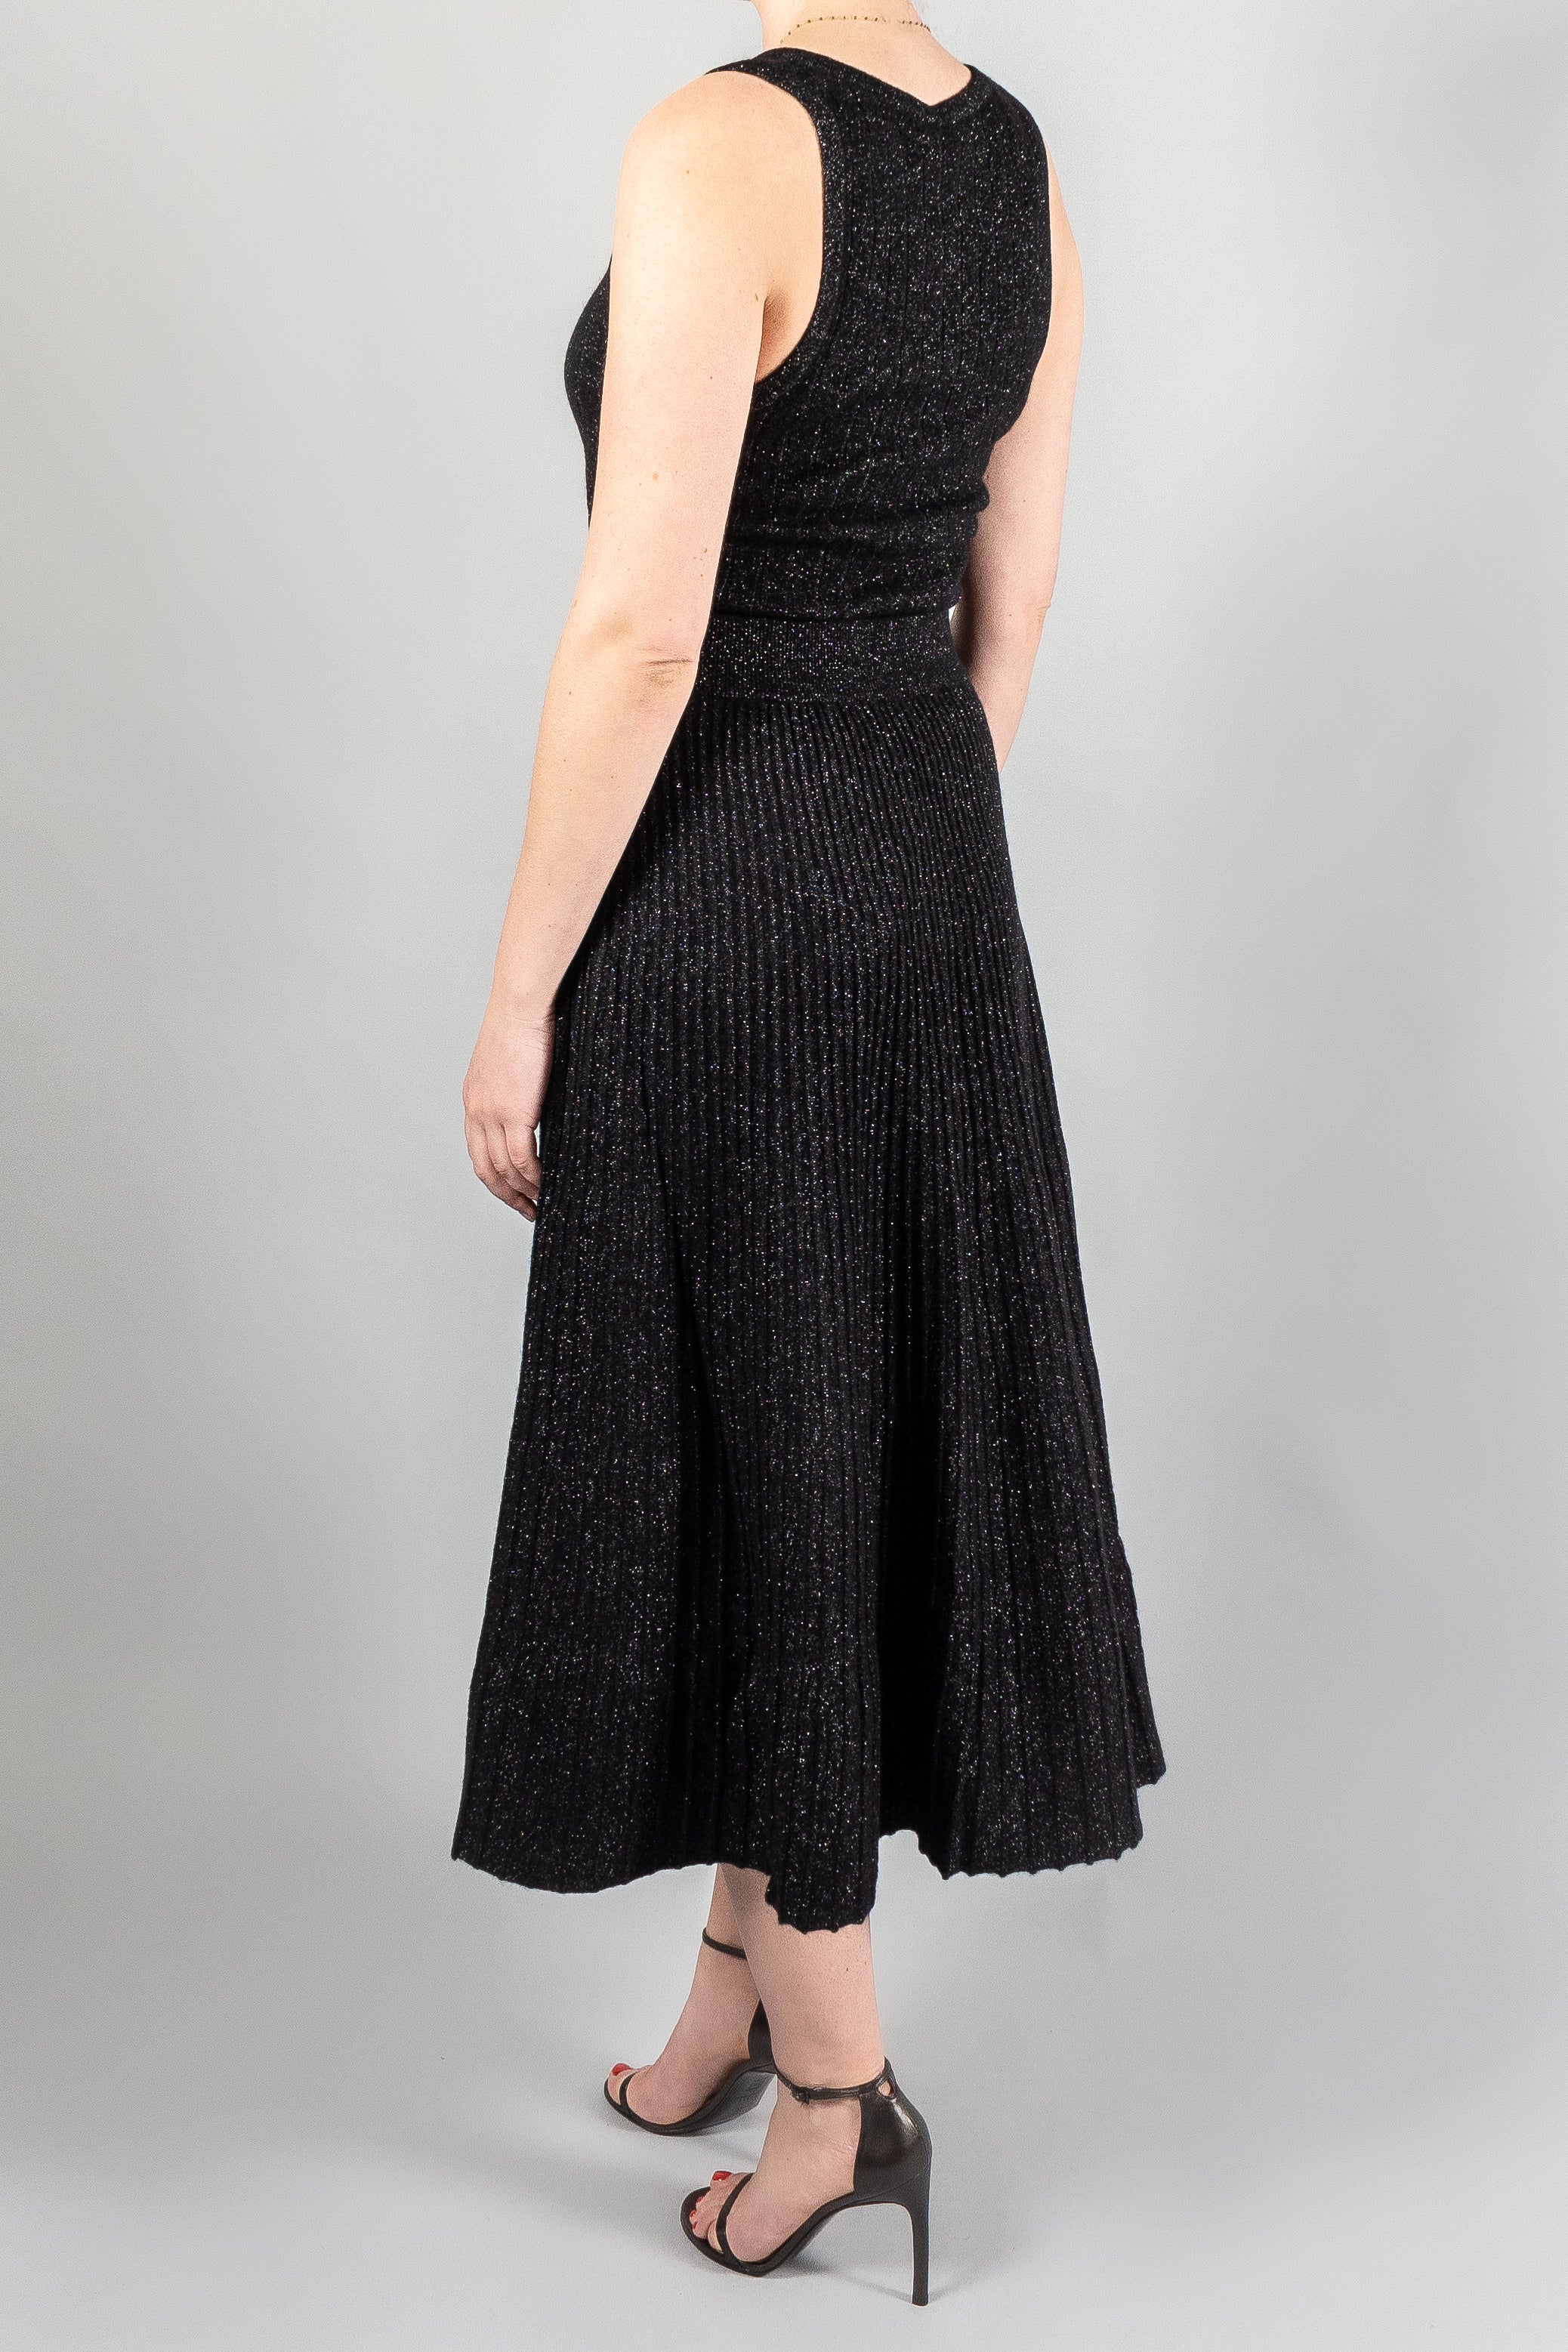 Lisa Yang Amelia Sparkle Skirt-Skirts-Misch-Boutique-Vancouver-Canada-misch.ca